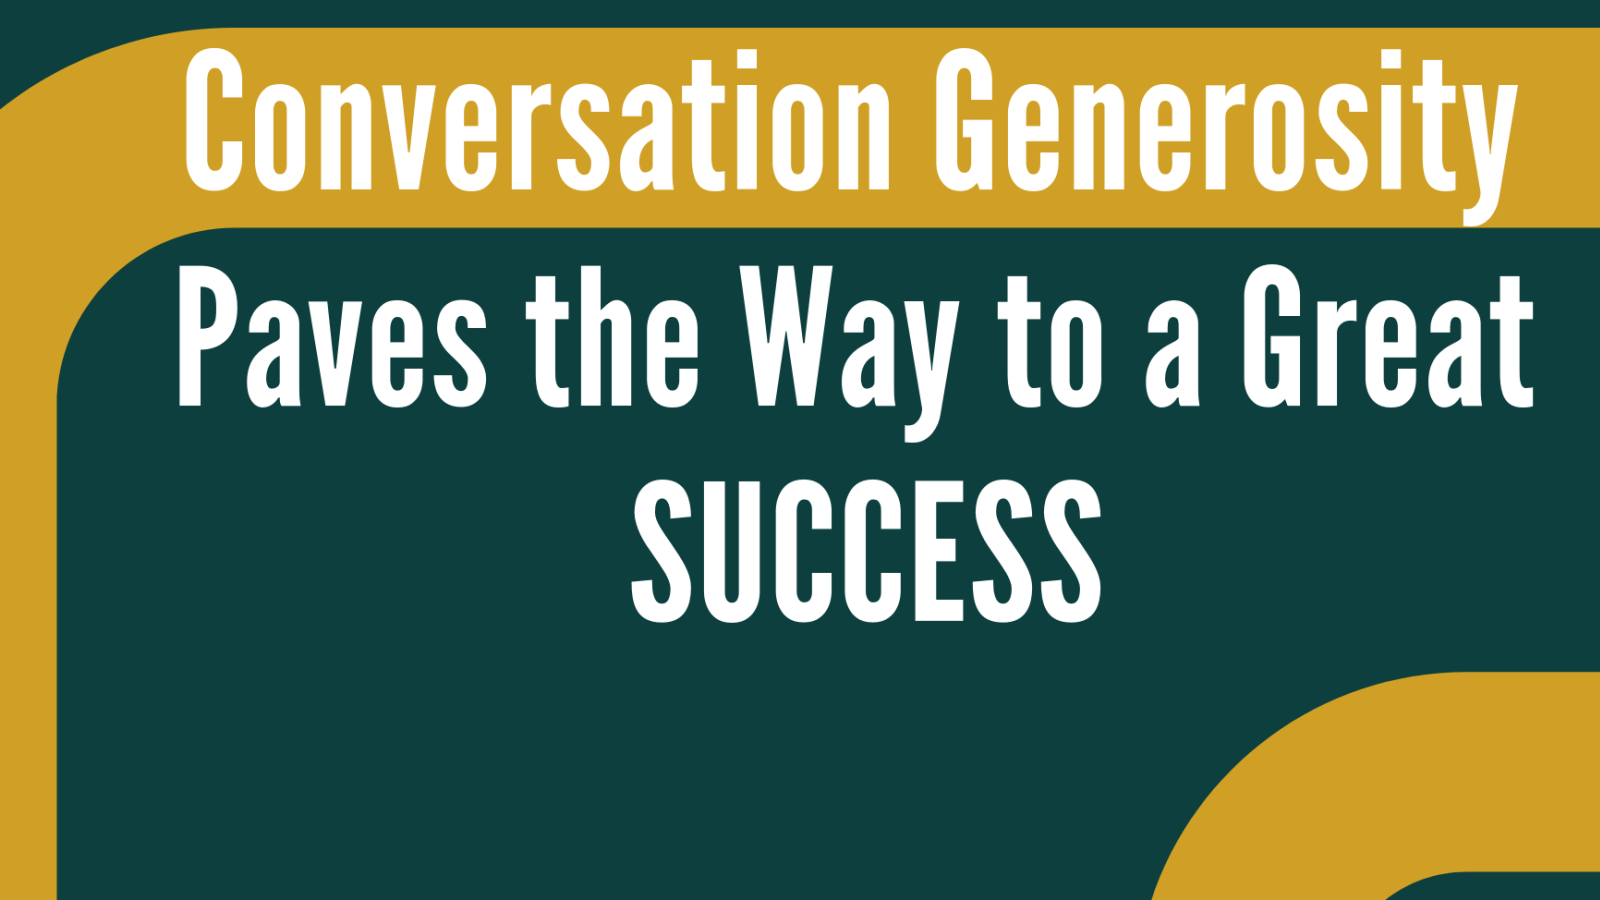 Conversation Generosity Paves the Way to a Great SUCCESS